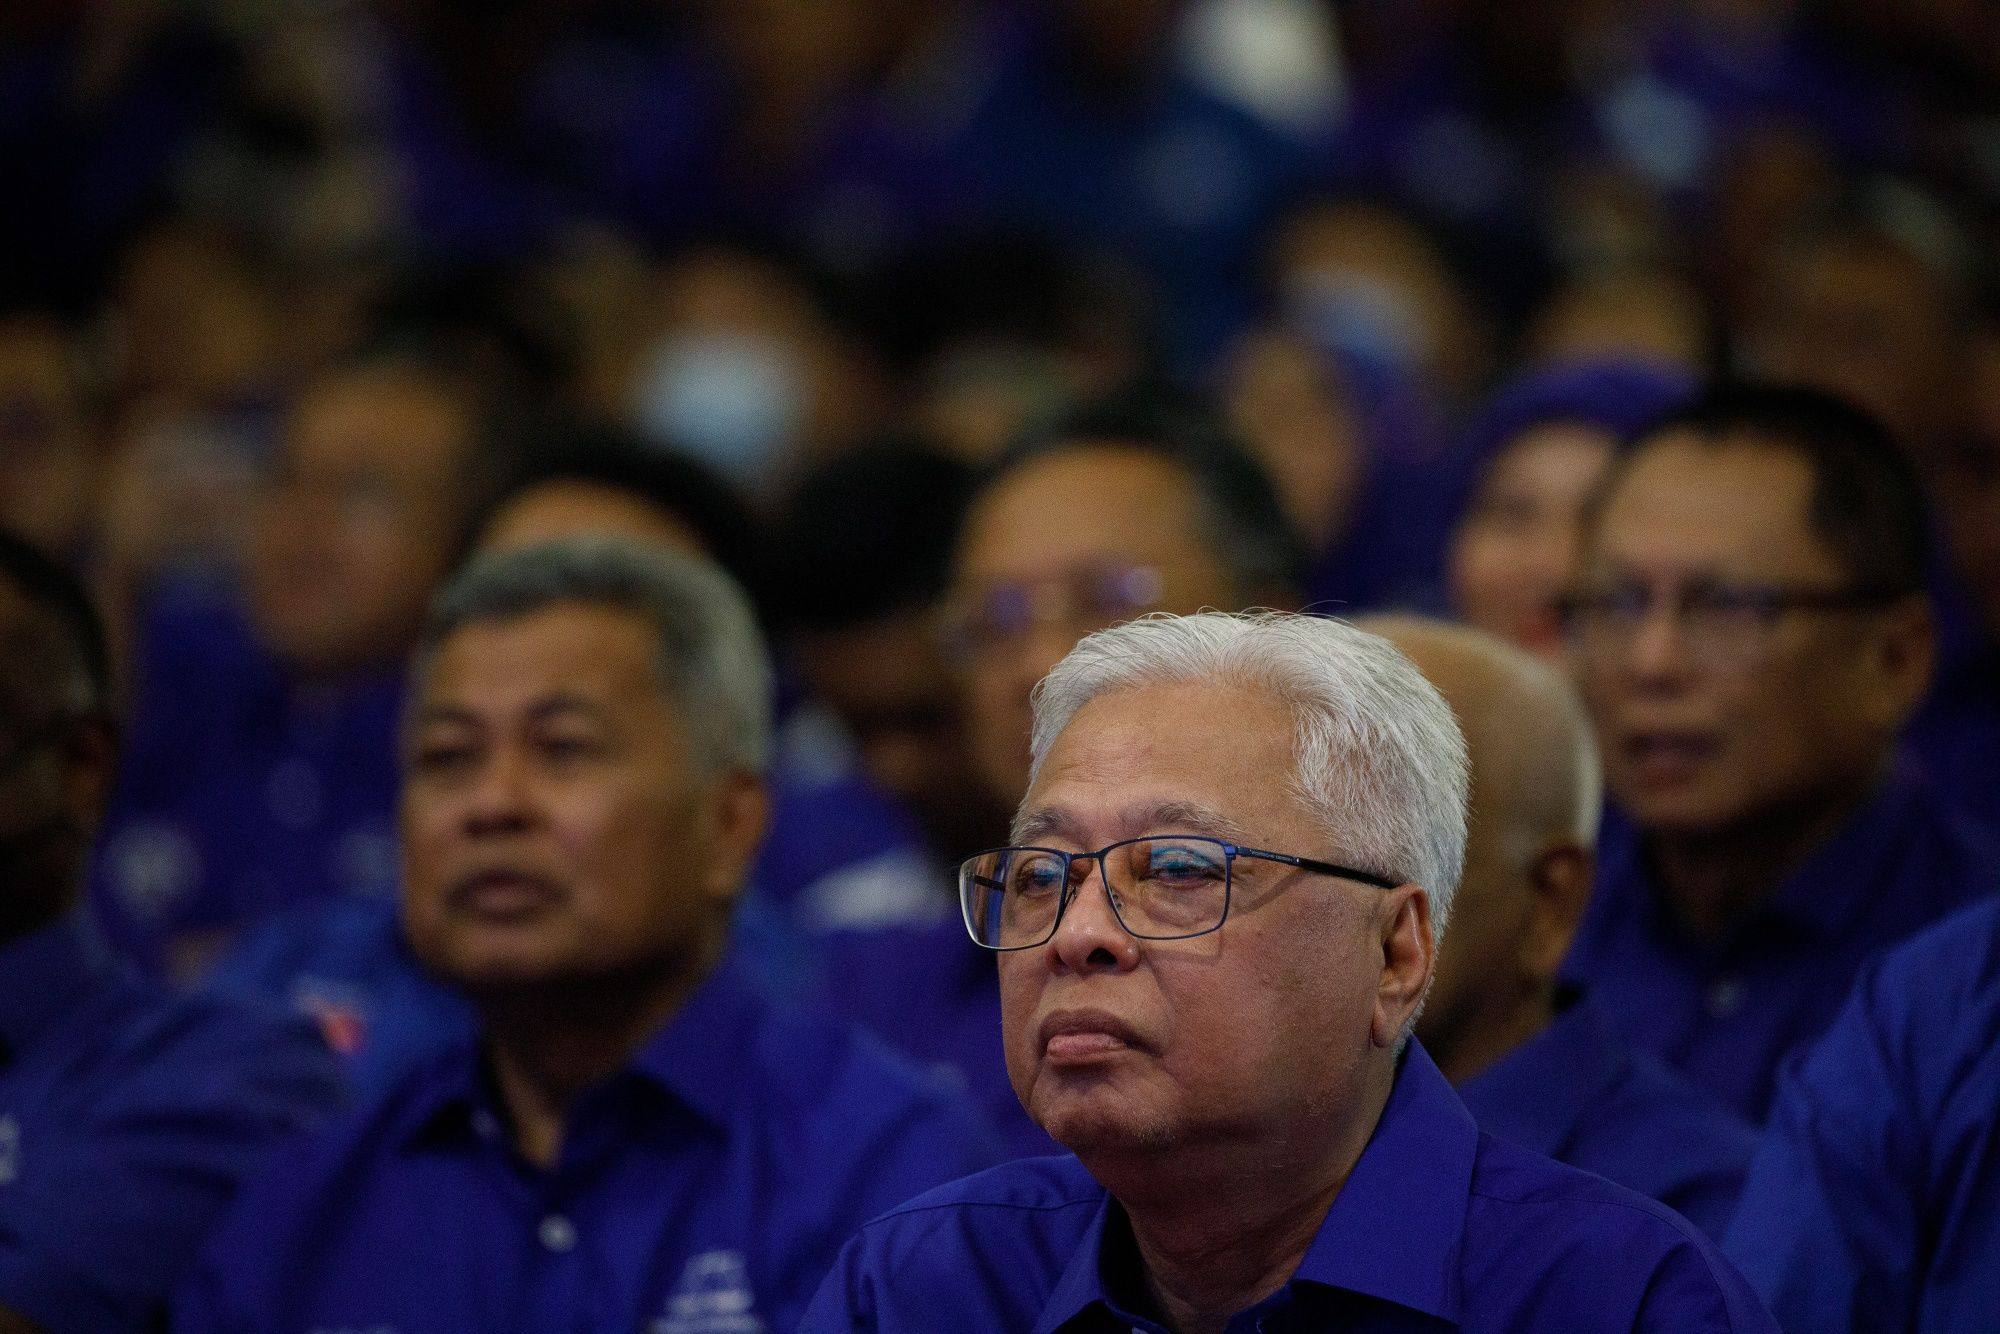 Malaysian Prime Minister Ismail Sabri Yaakob listens during an announcement of Barisan National candidates at Umno headquarters ahead of general elections. Photo: Bloomberg